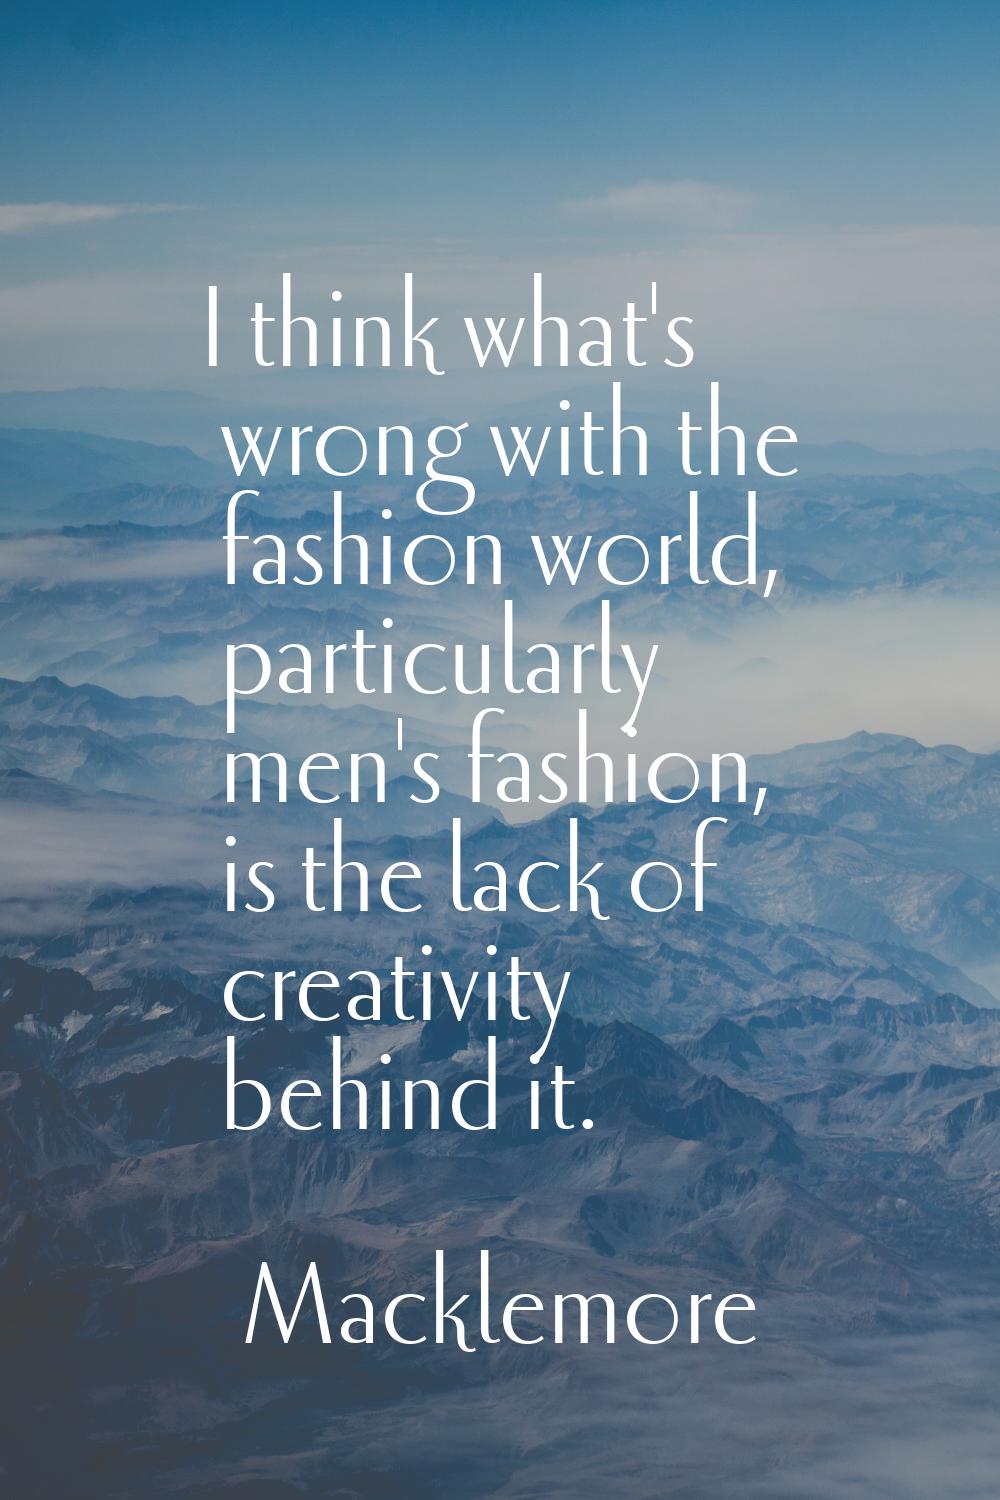 I think what's wrong with the fashion world, particularly men's fashion, is the lack of creativity 